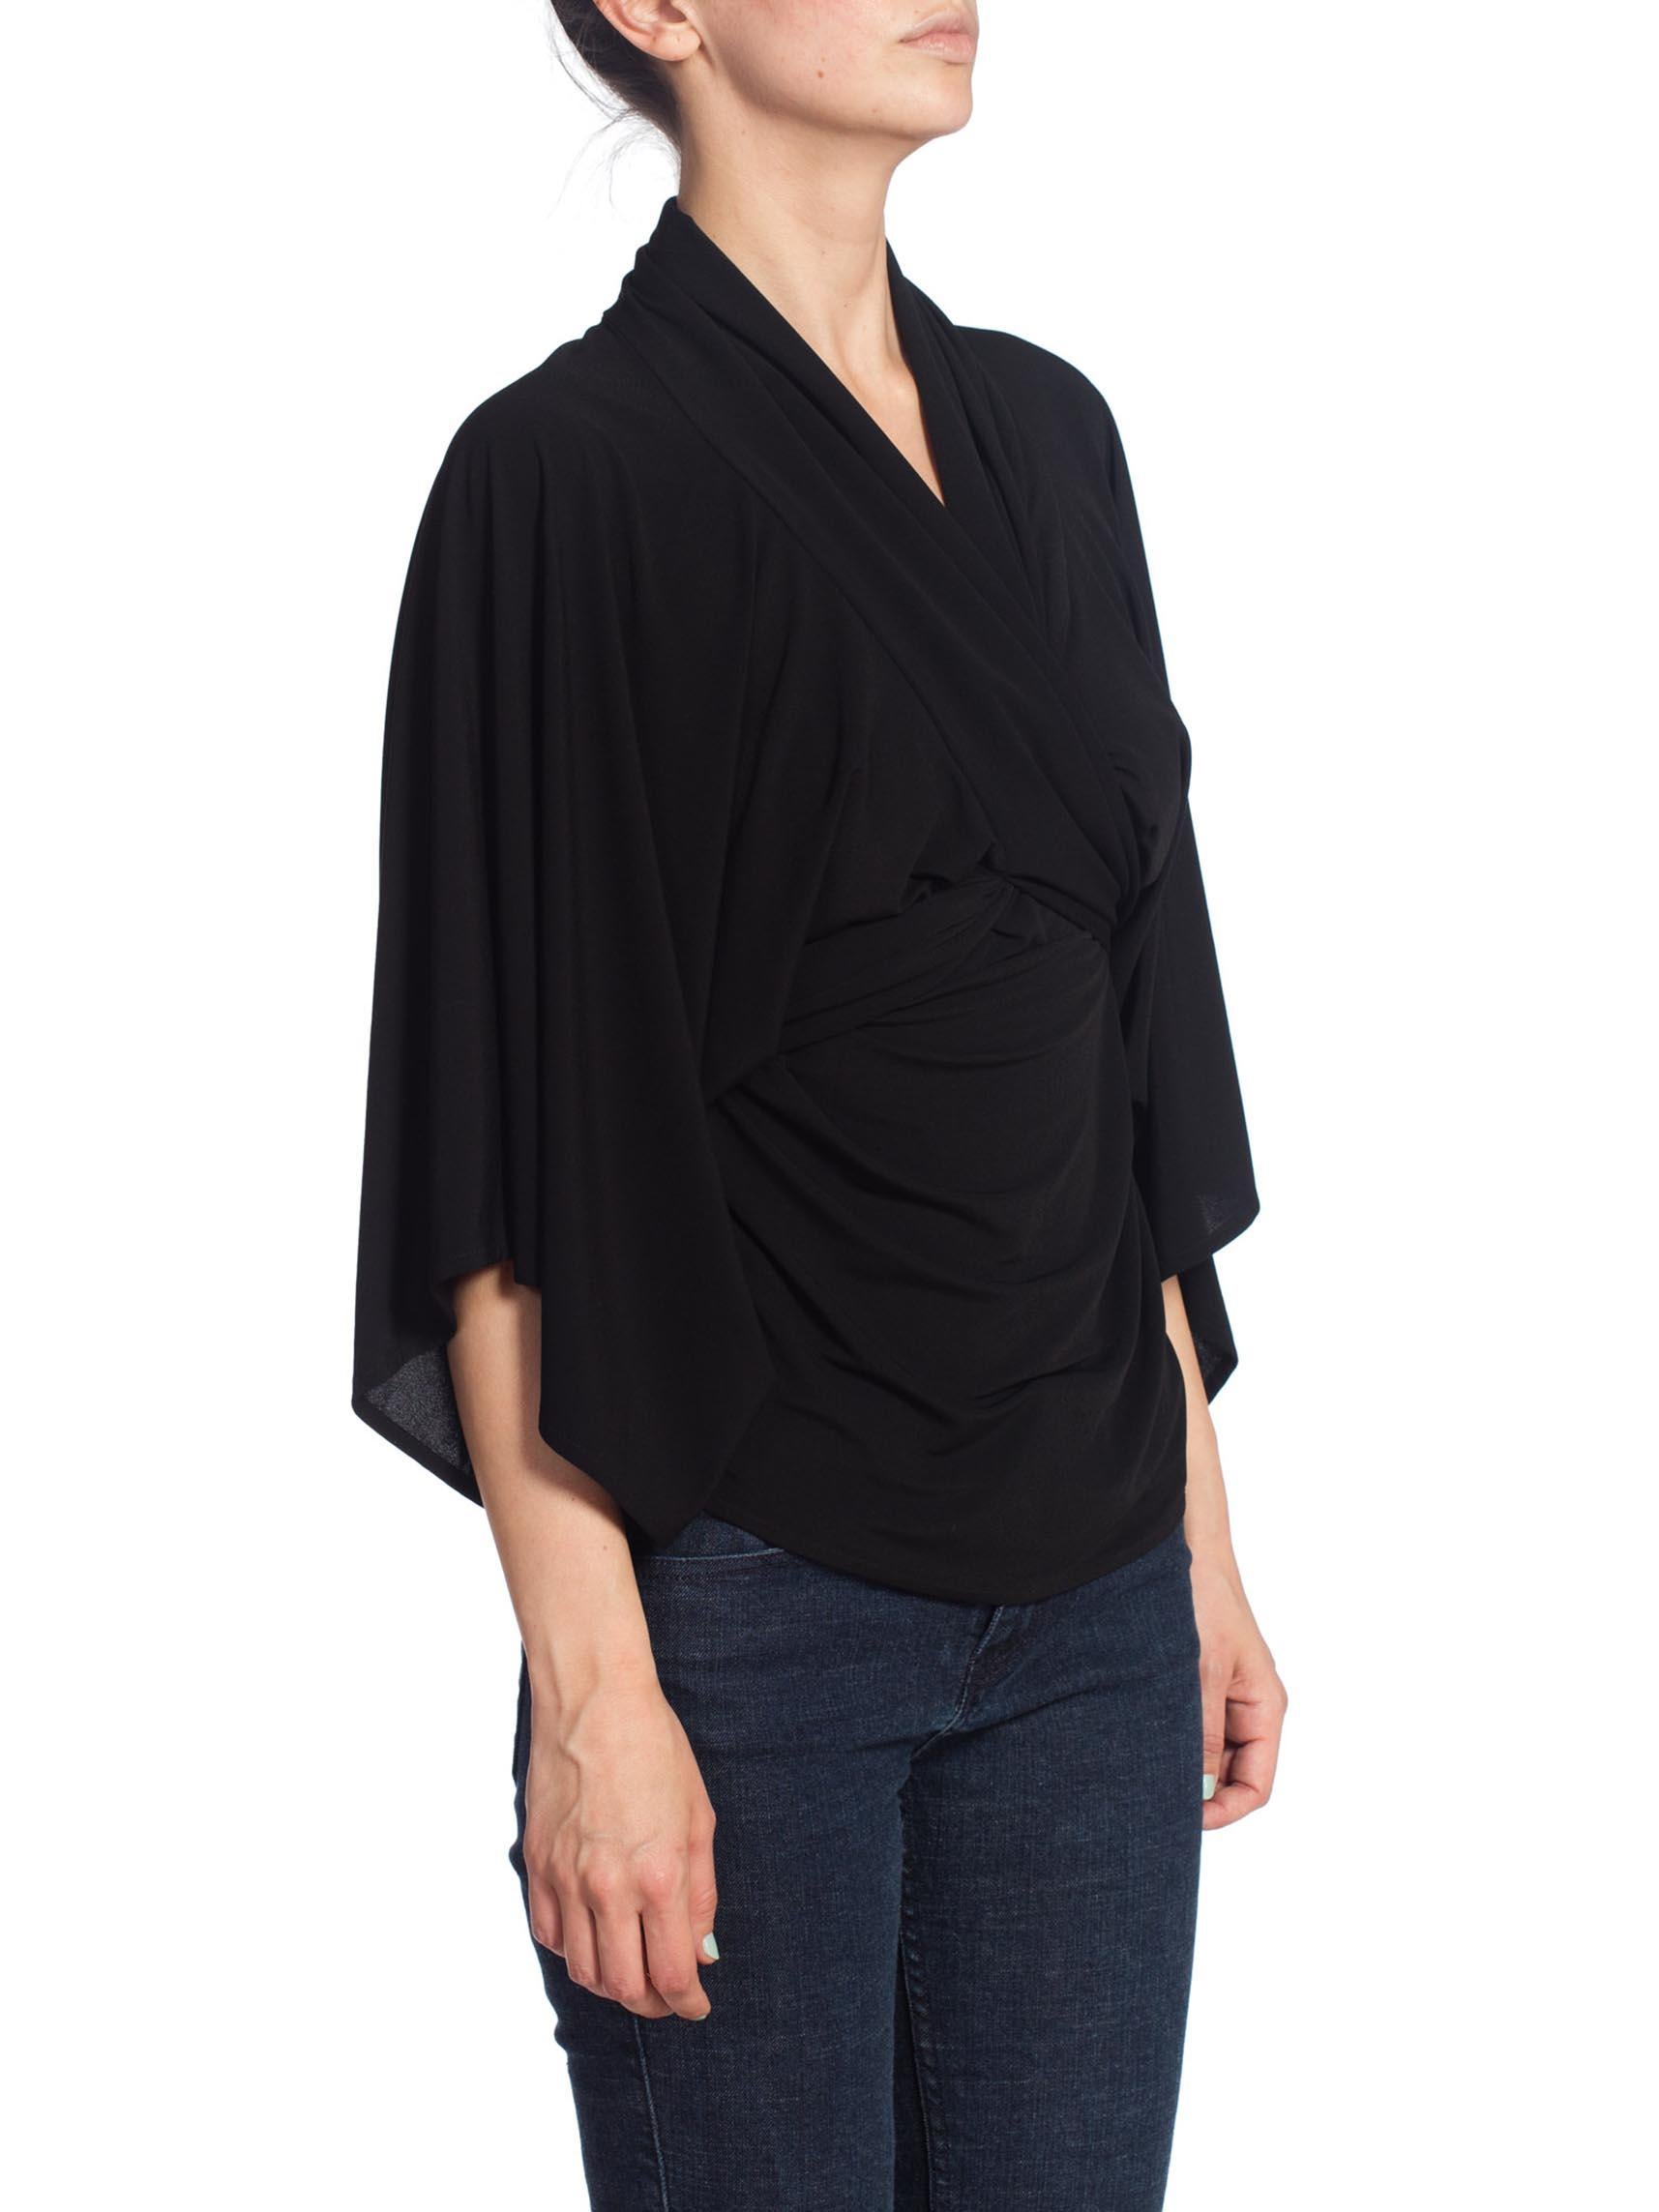 Women's 1980S NORMA KAMALI Style Black Jersey Draped Oversize Top For Sale